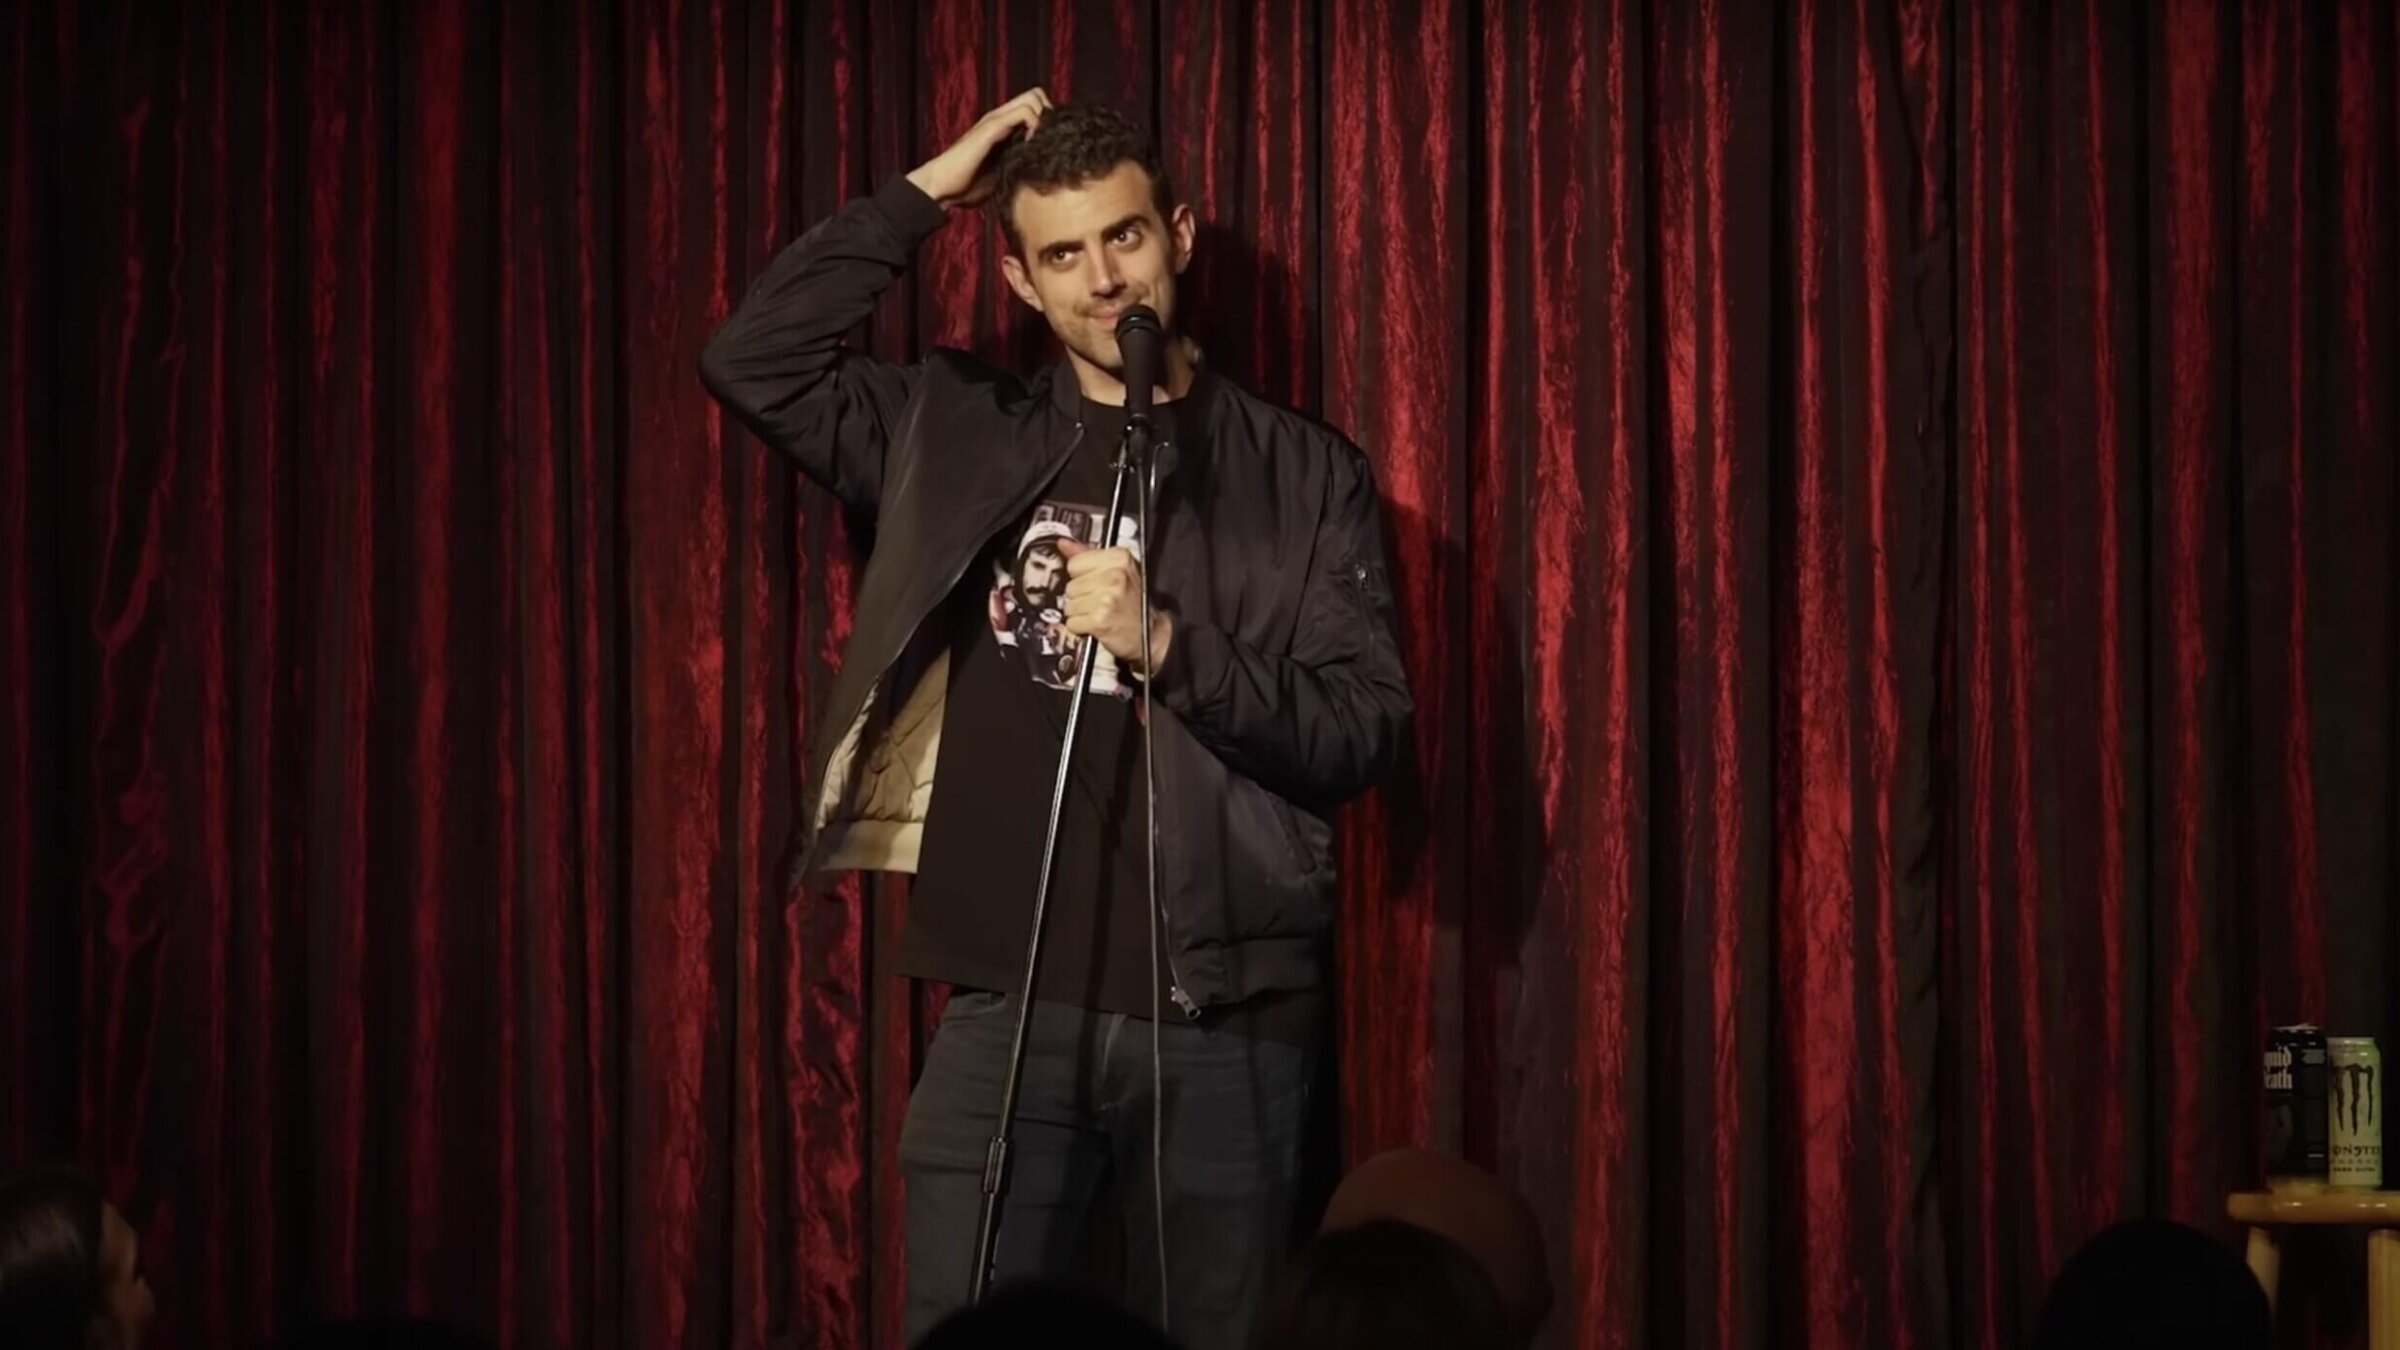 Comedian Sam Morril at the moment when his set in Omaha, Nebraska is interrupted by a heckler shouting "Free Palestine," October 2, 2022. 